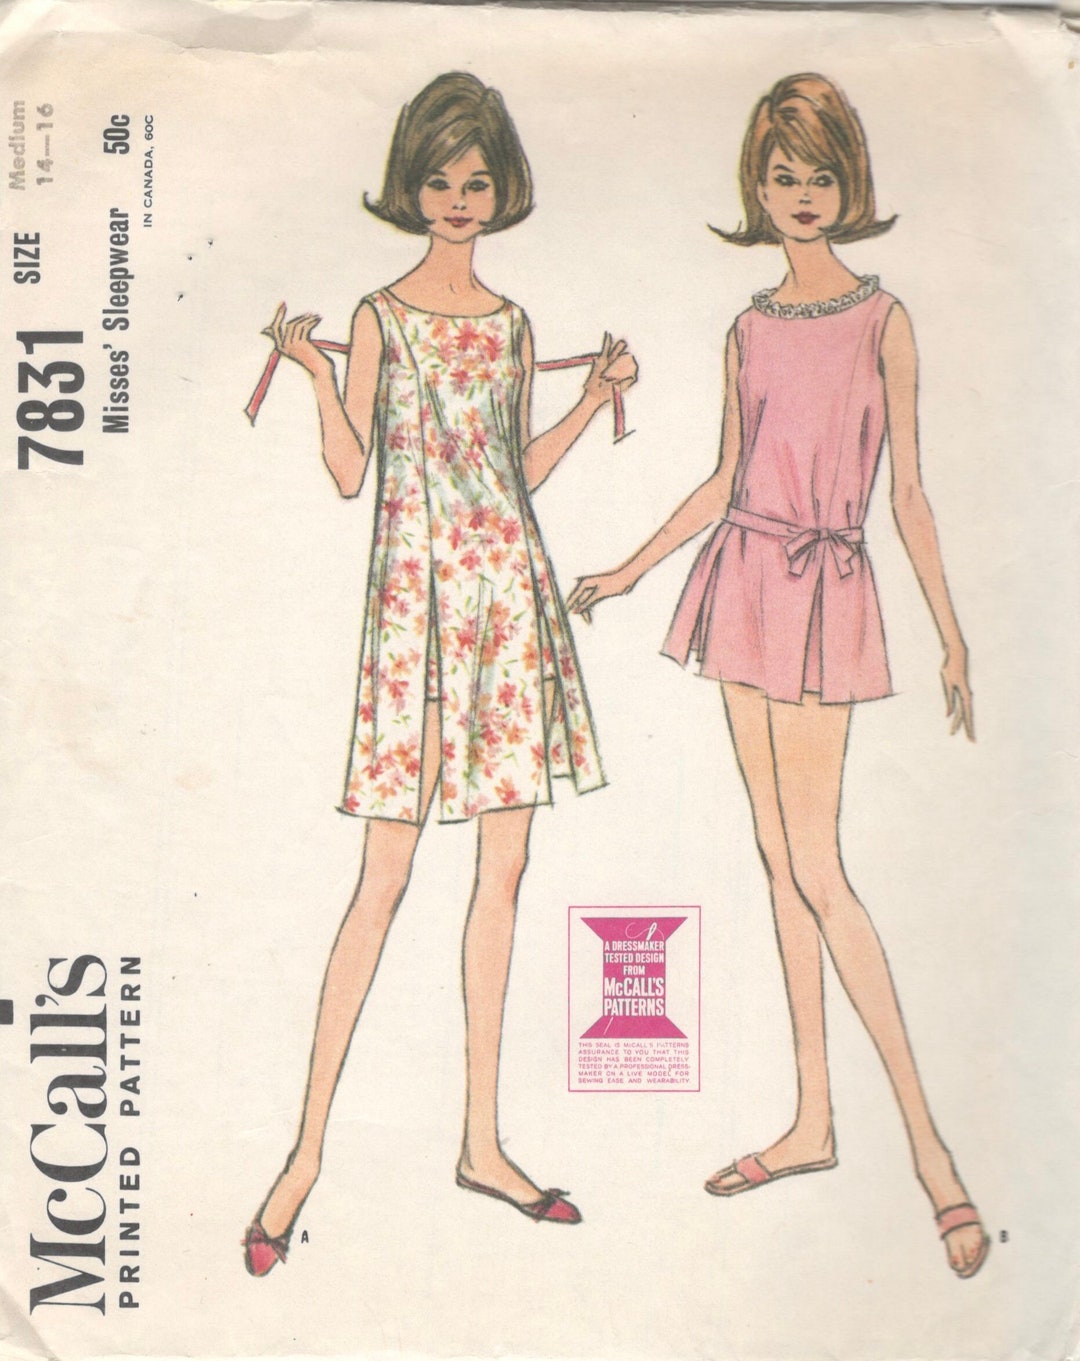 Mccalls 7831 Misses Sleepwear Pattern Nightgown and Shorts - Etsy